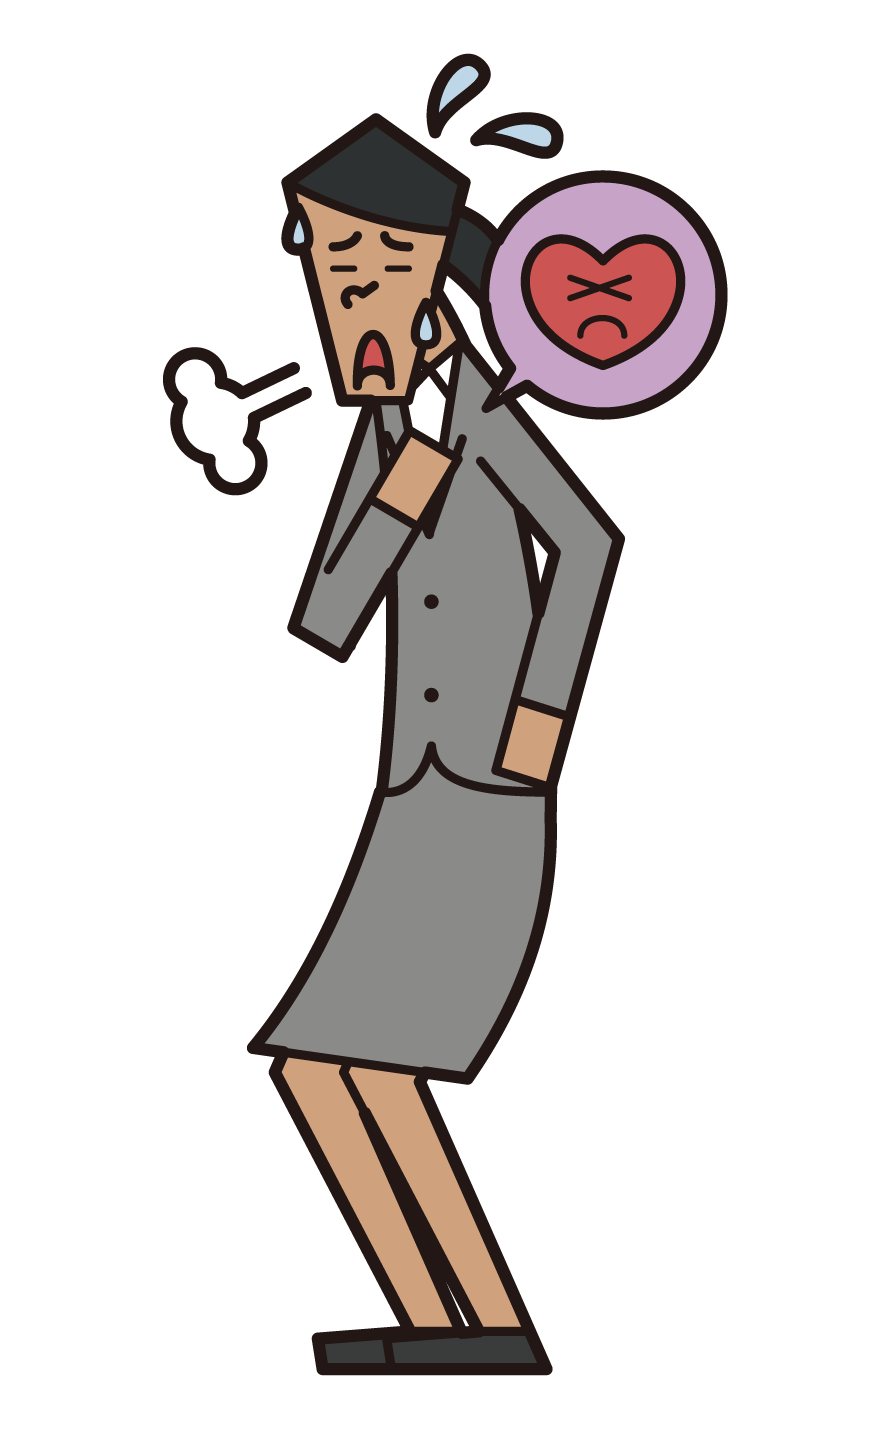 Illustration of a person (female) who feels palpitations